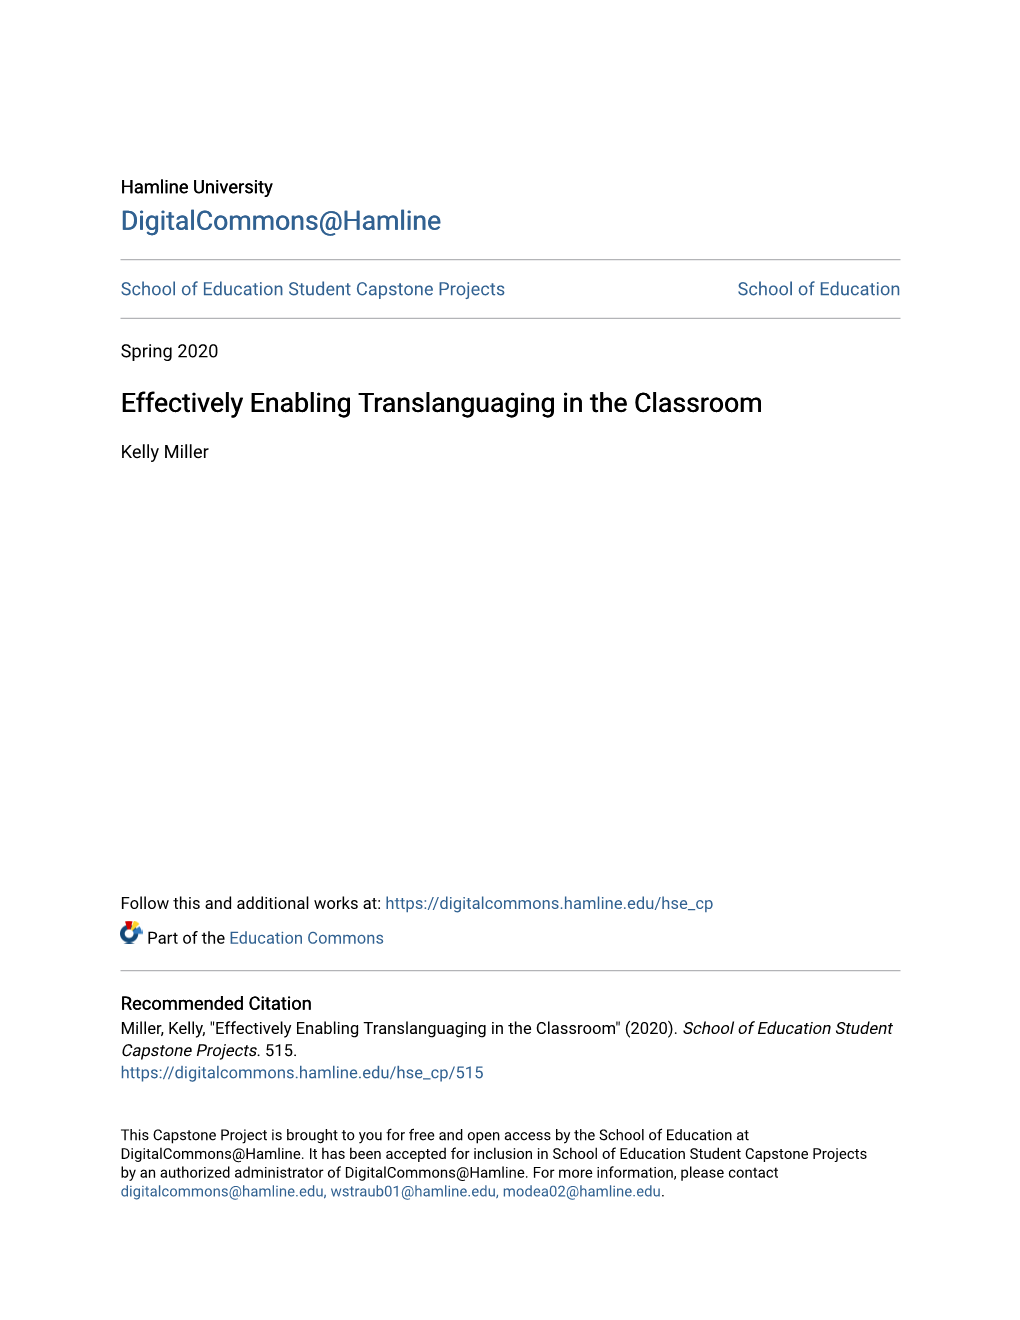 Effectively Enabling Translanguaging in the Classroom